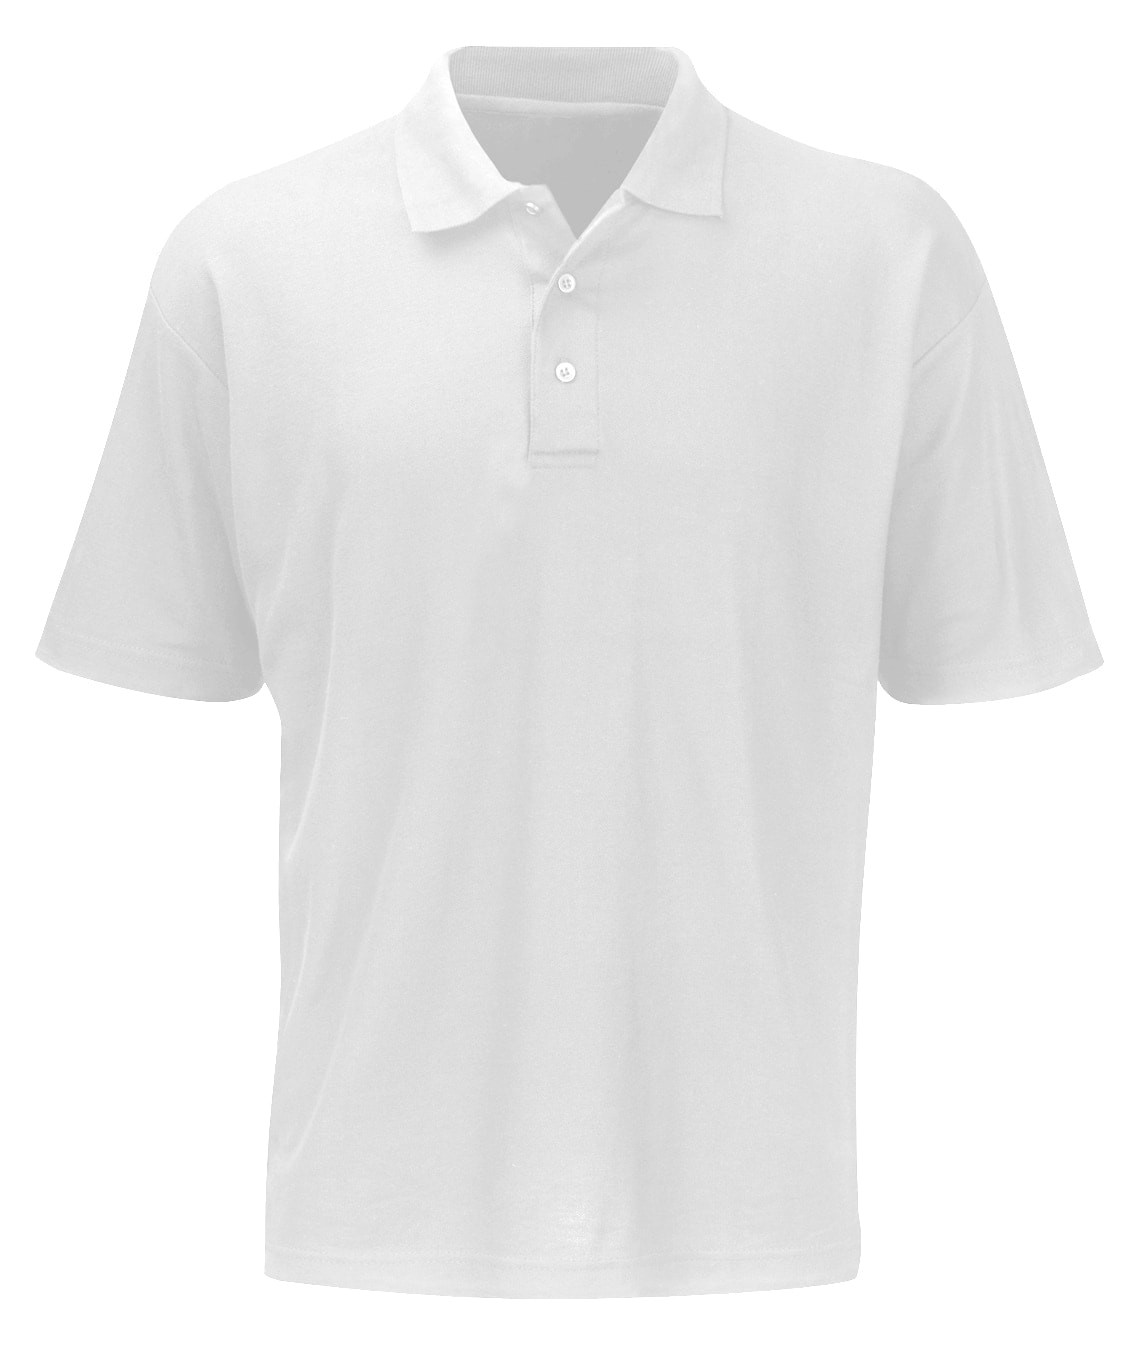 Fastrack Ultra: Polo Shirt Heavy Weight